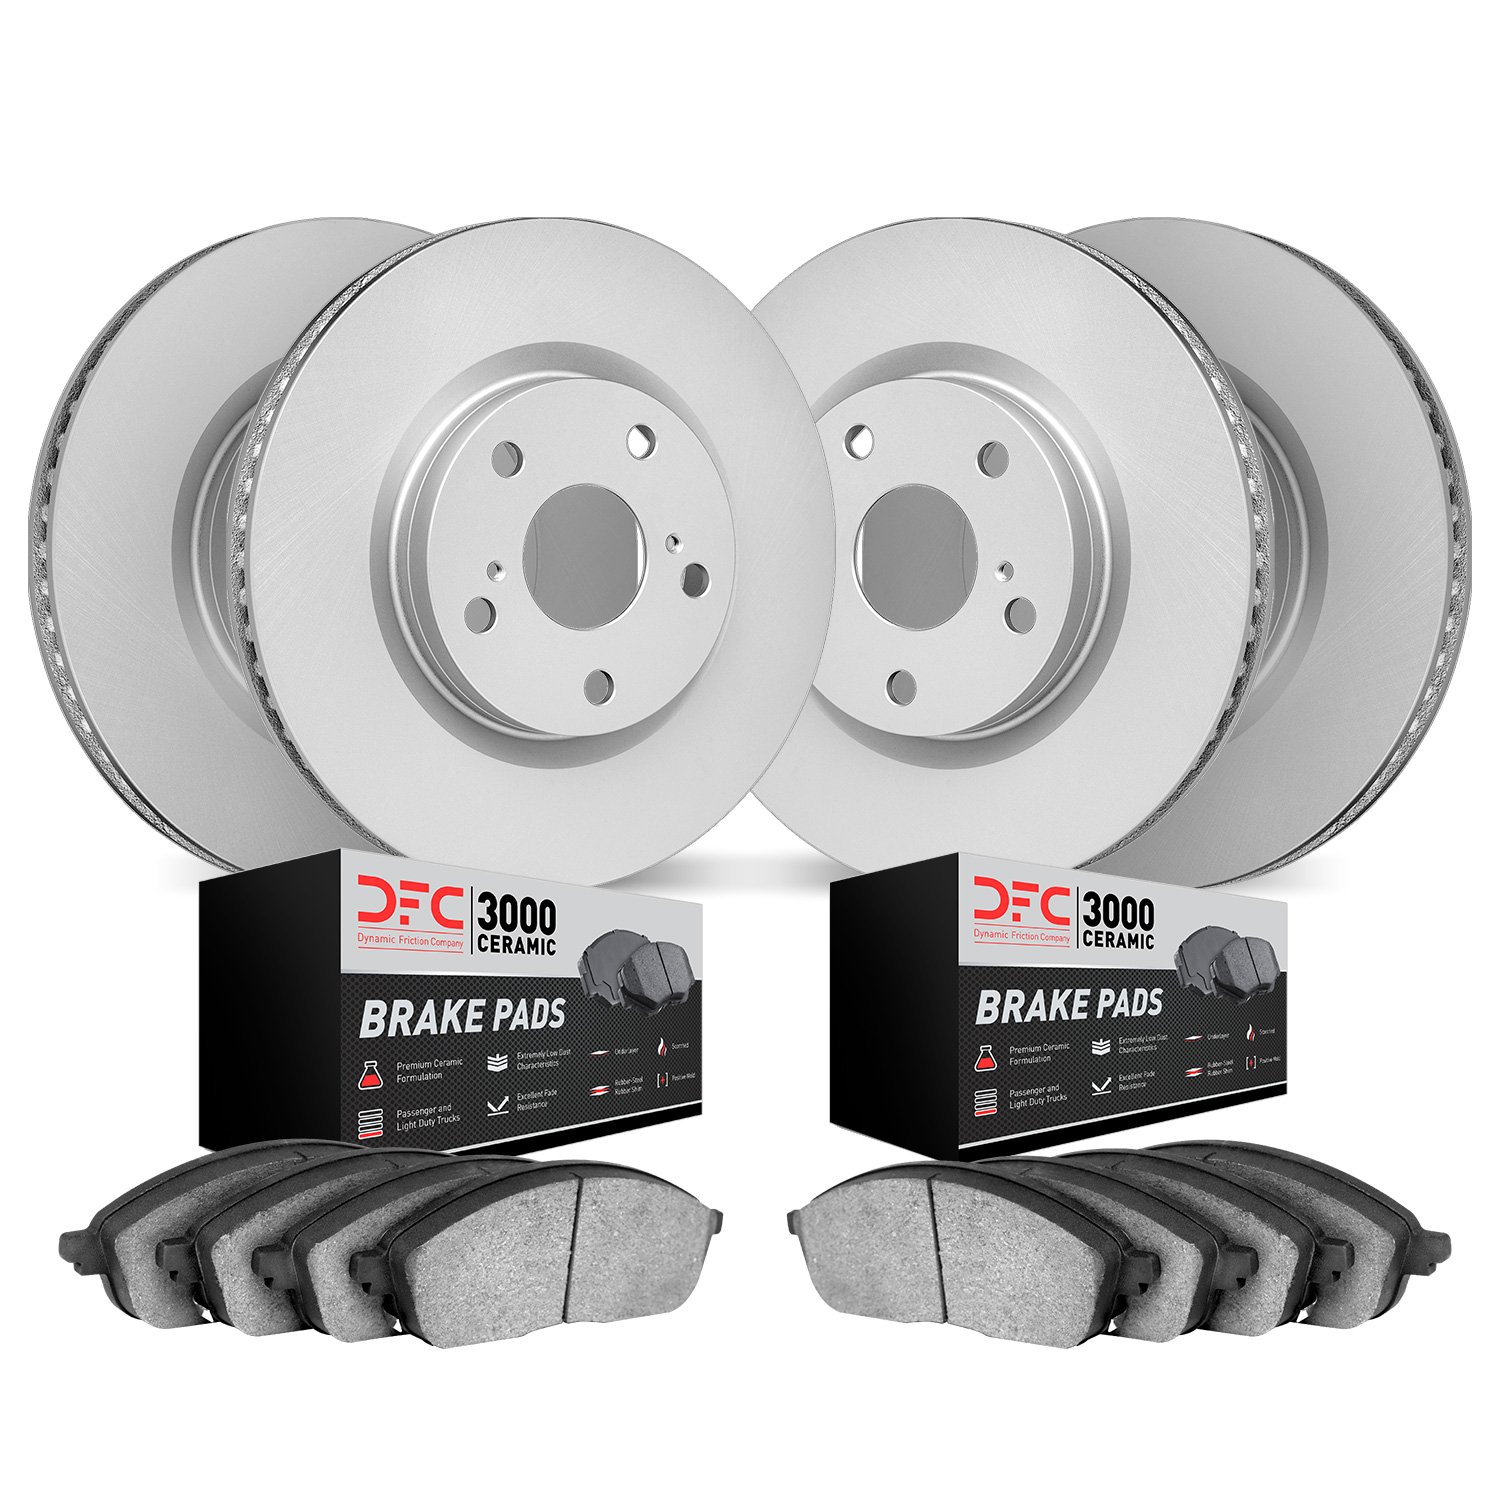 4304-31043 Geospec Brake Rotors with 3000-Series Ceramic Brake Pads Kit, 2009-2016 BMW, Position: Front and Rear